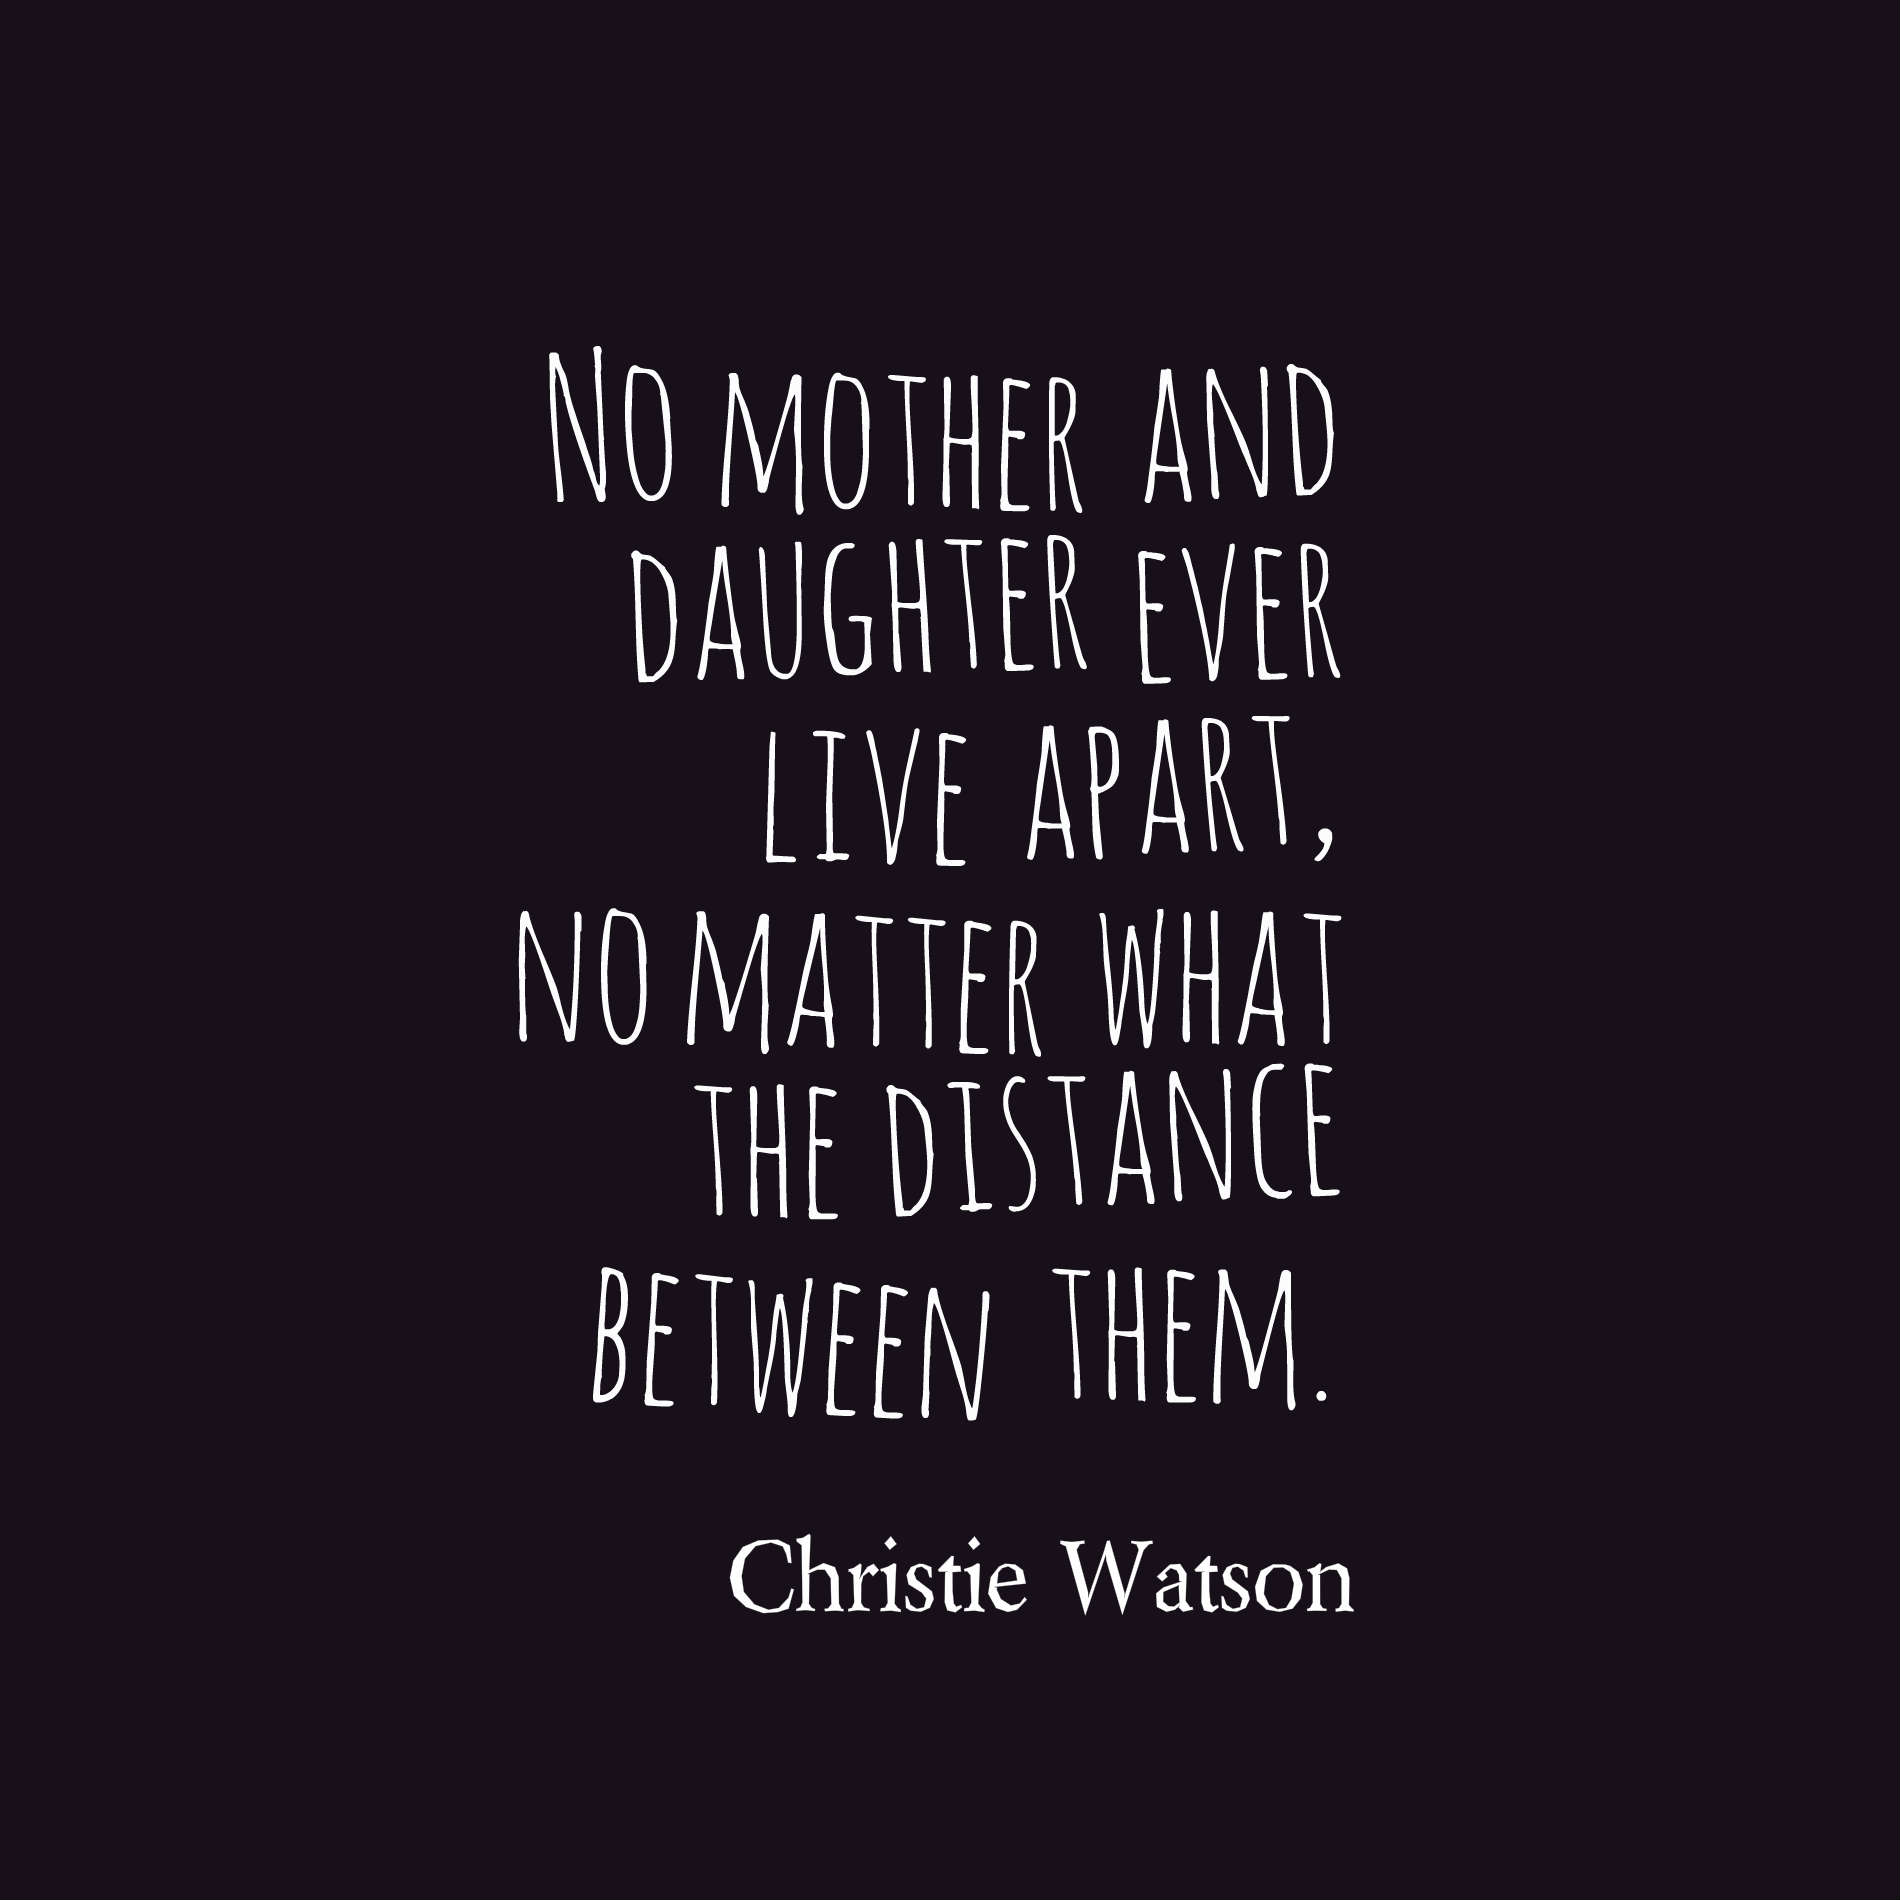 No mother and daughter ever live apart, no matter what the distance between them